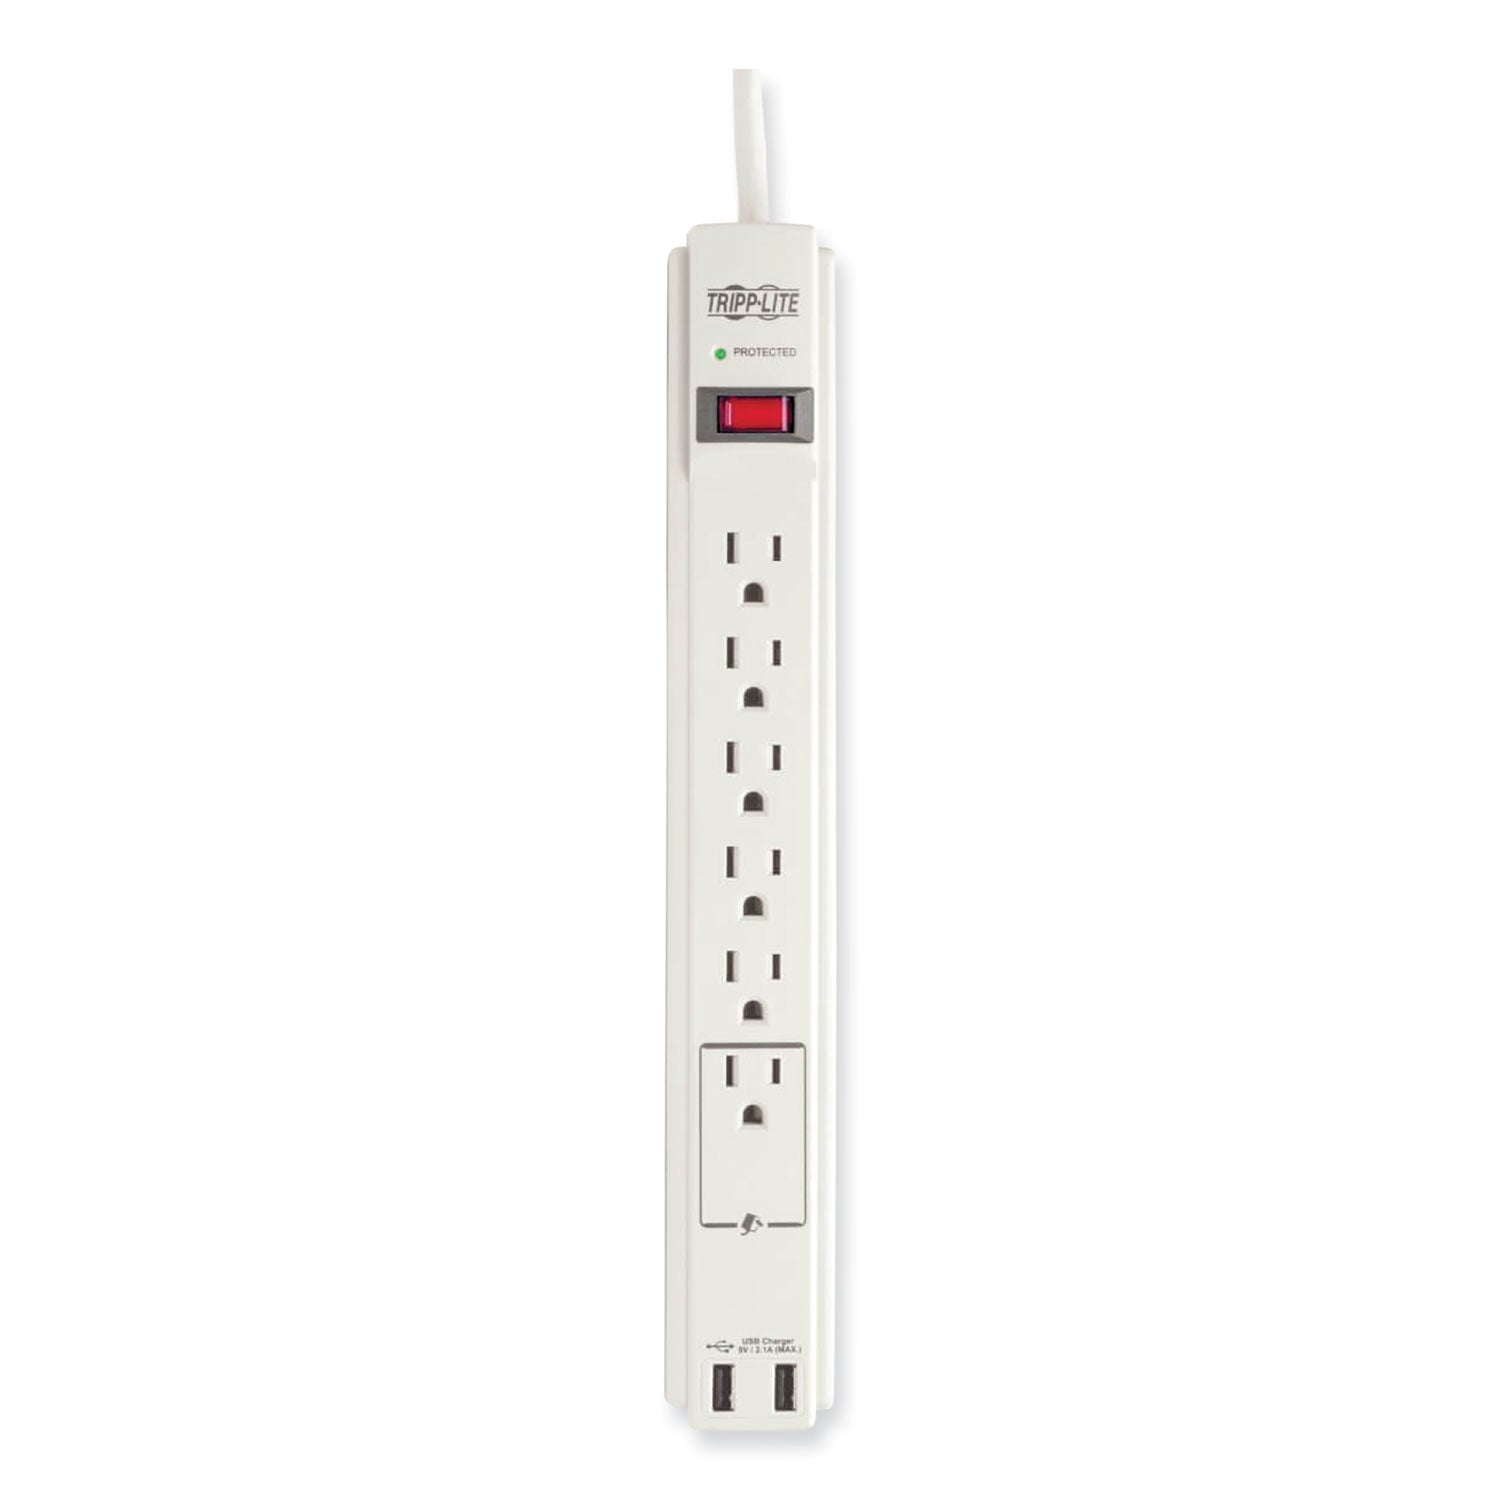 Protect It! Surge Protector, 6 AC Outlets/2 USB Ports, 6 ft Cord, 990 J, Cool Gray - 